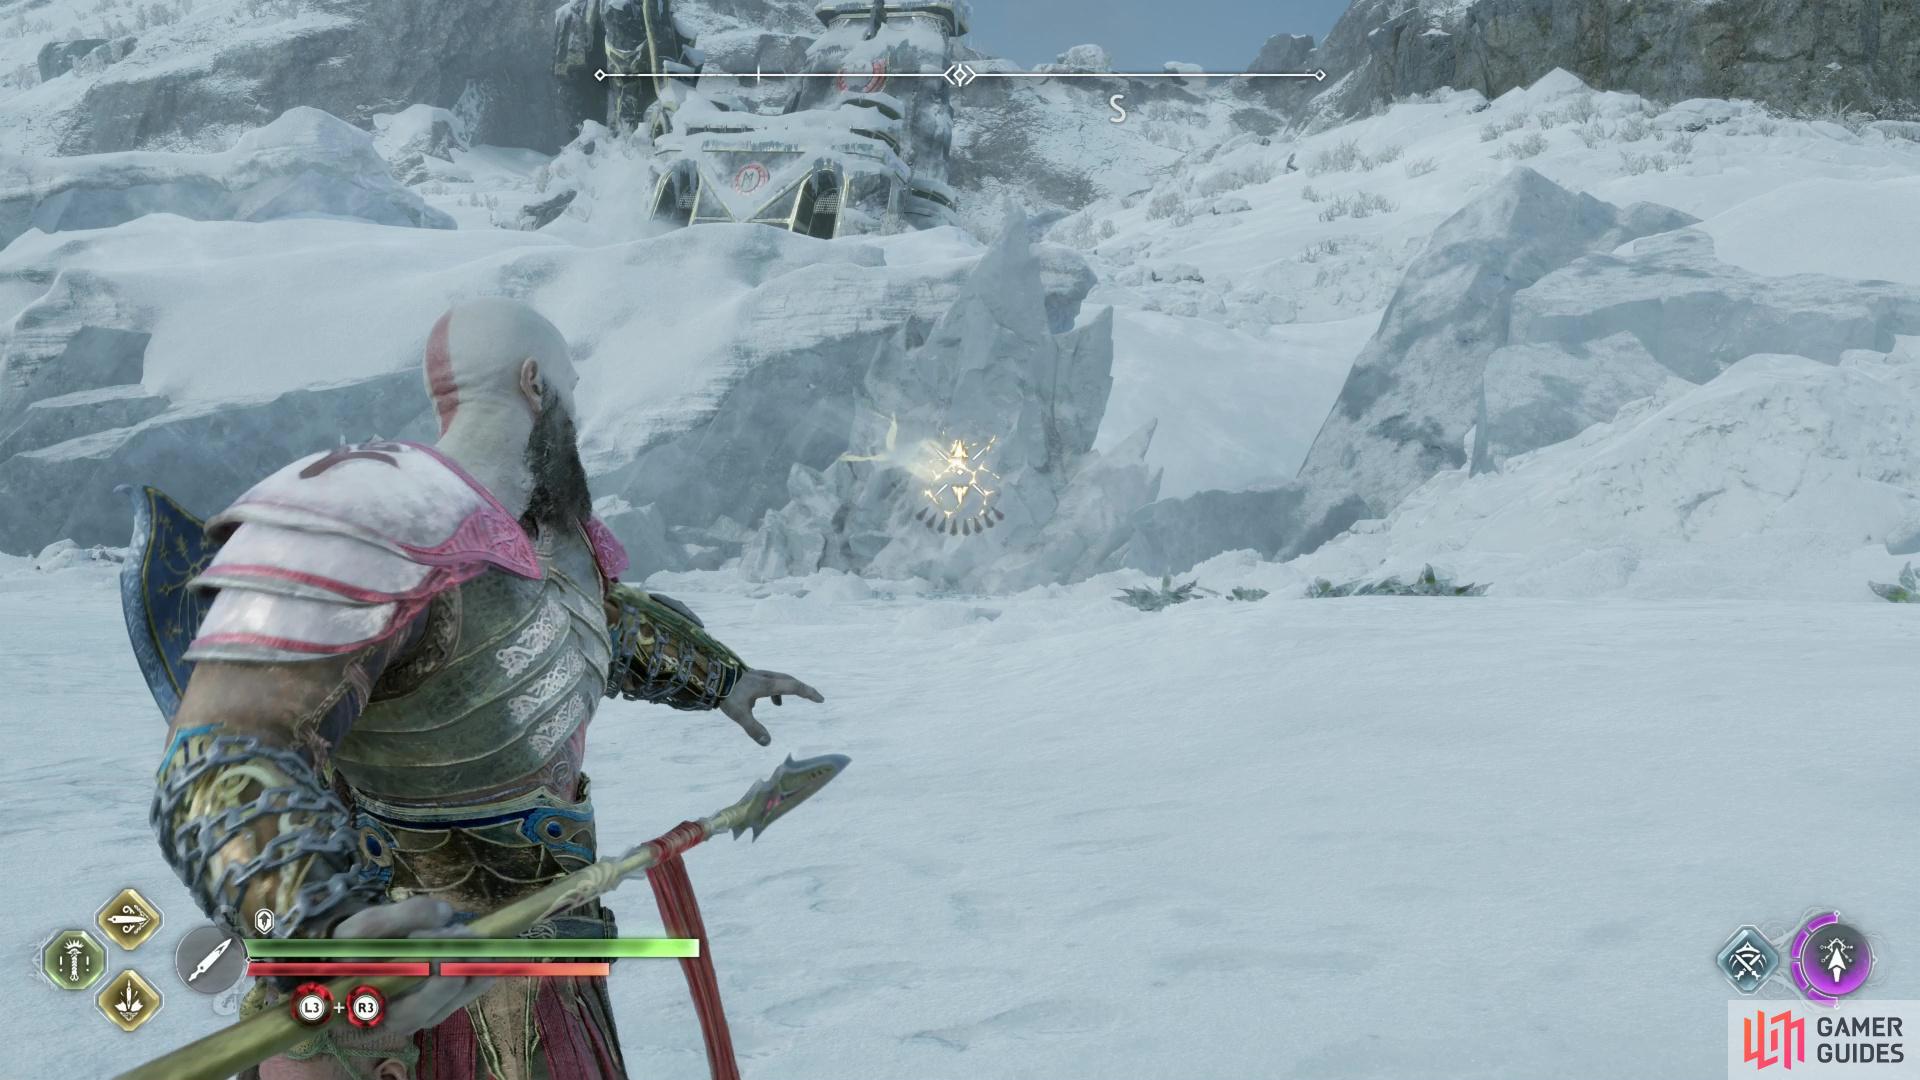 Use the Draupnir Spear to clear another hunk of ice,